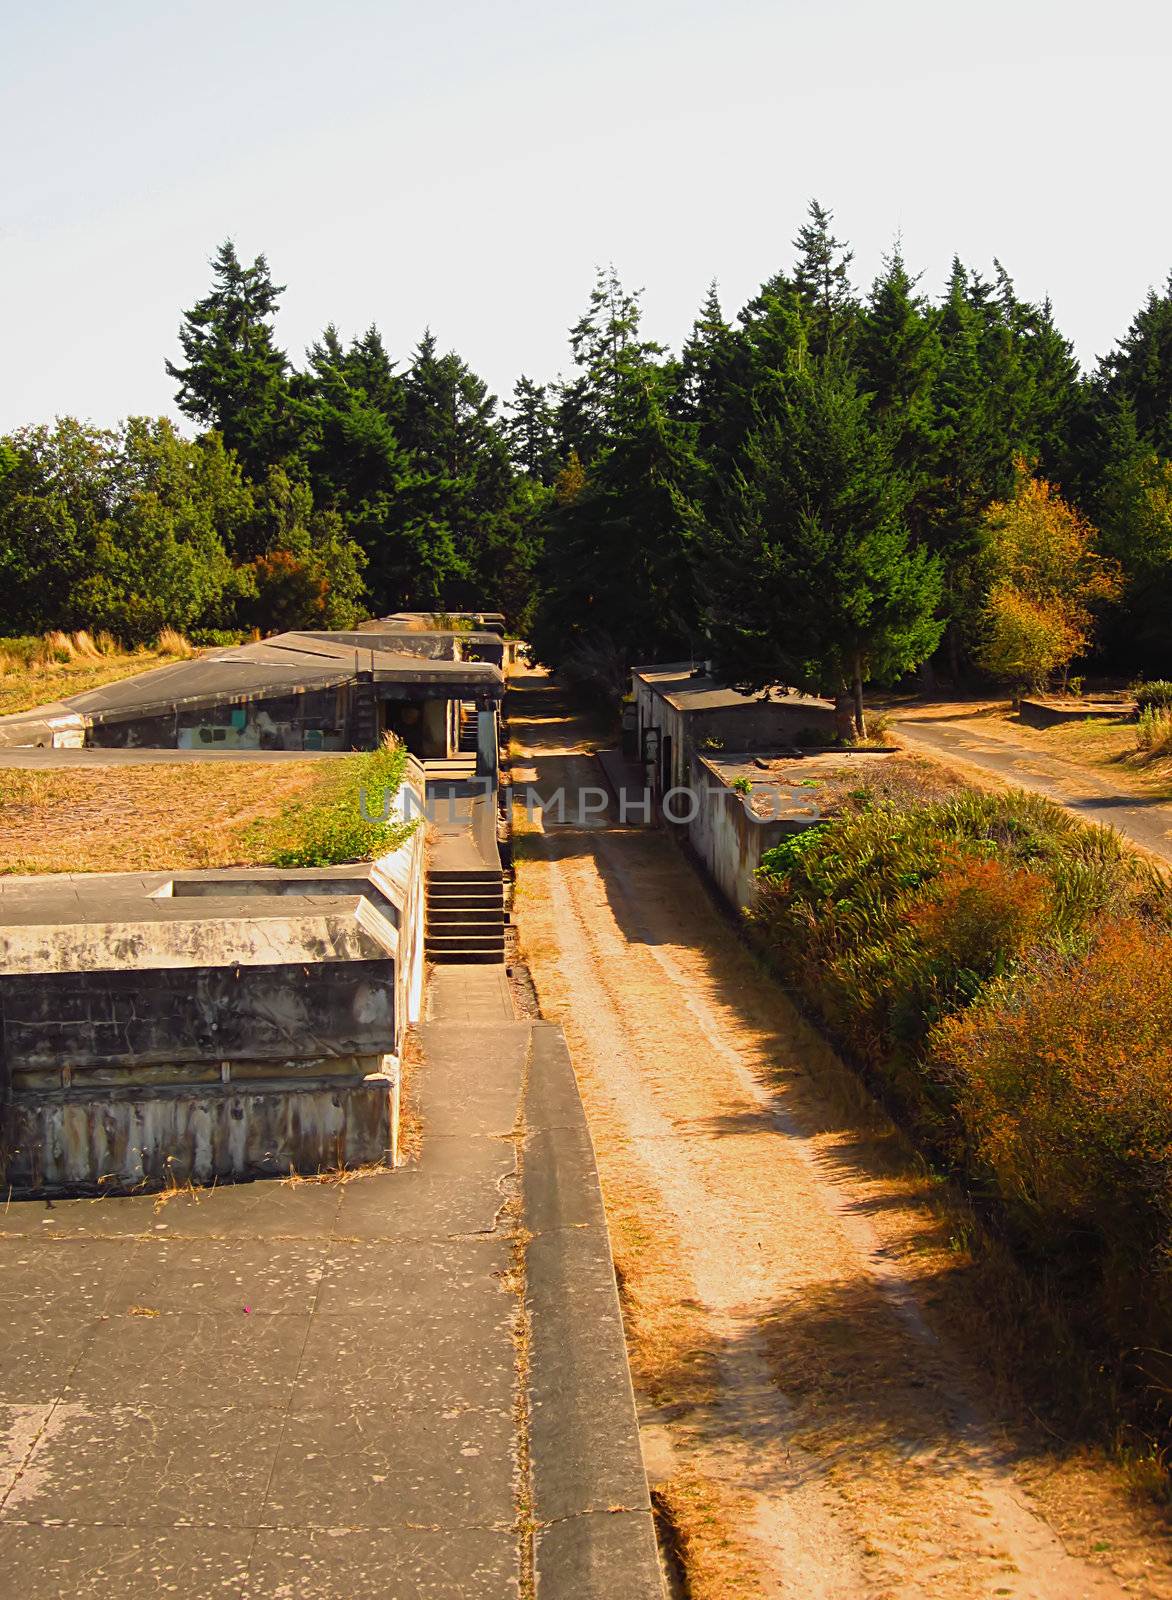 A photograph of an old abandoned military fort.